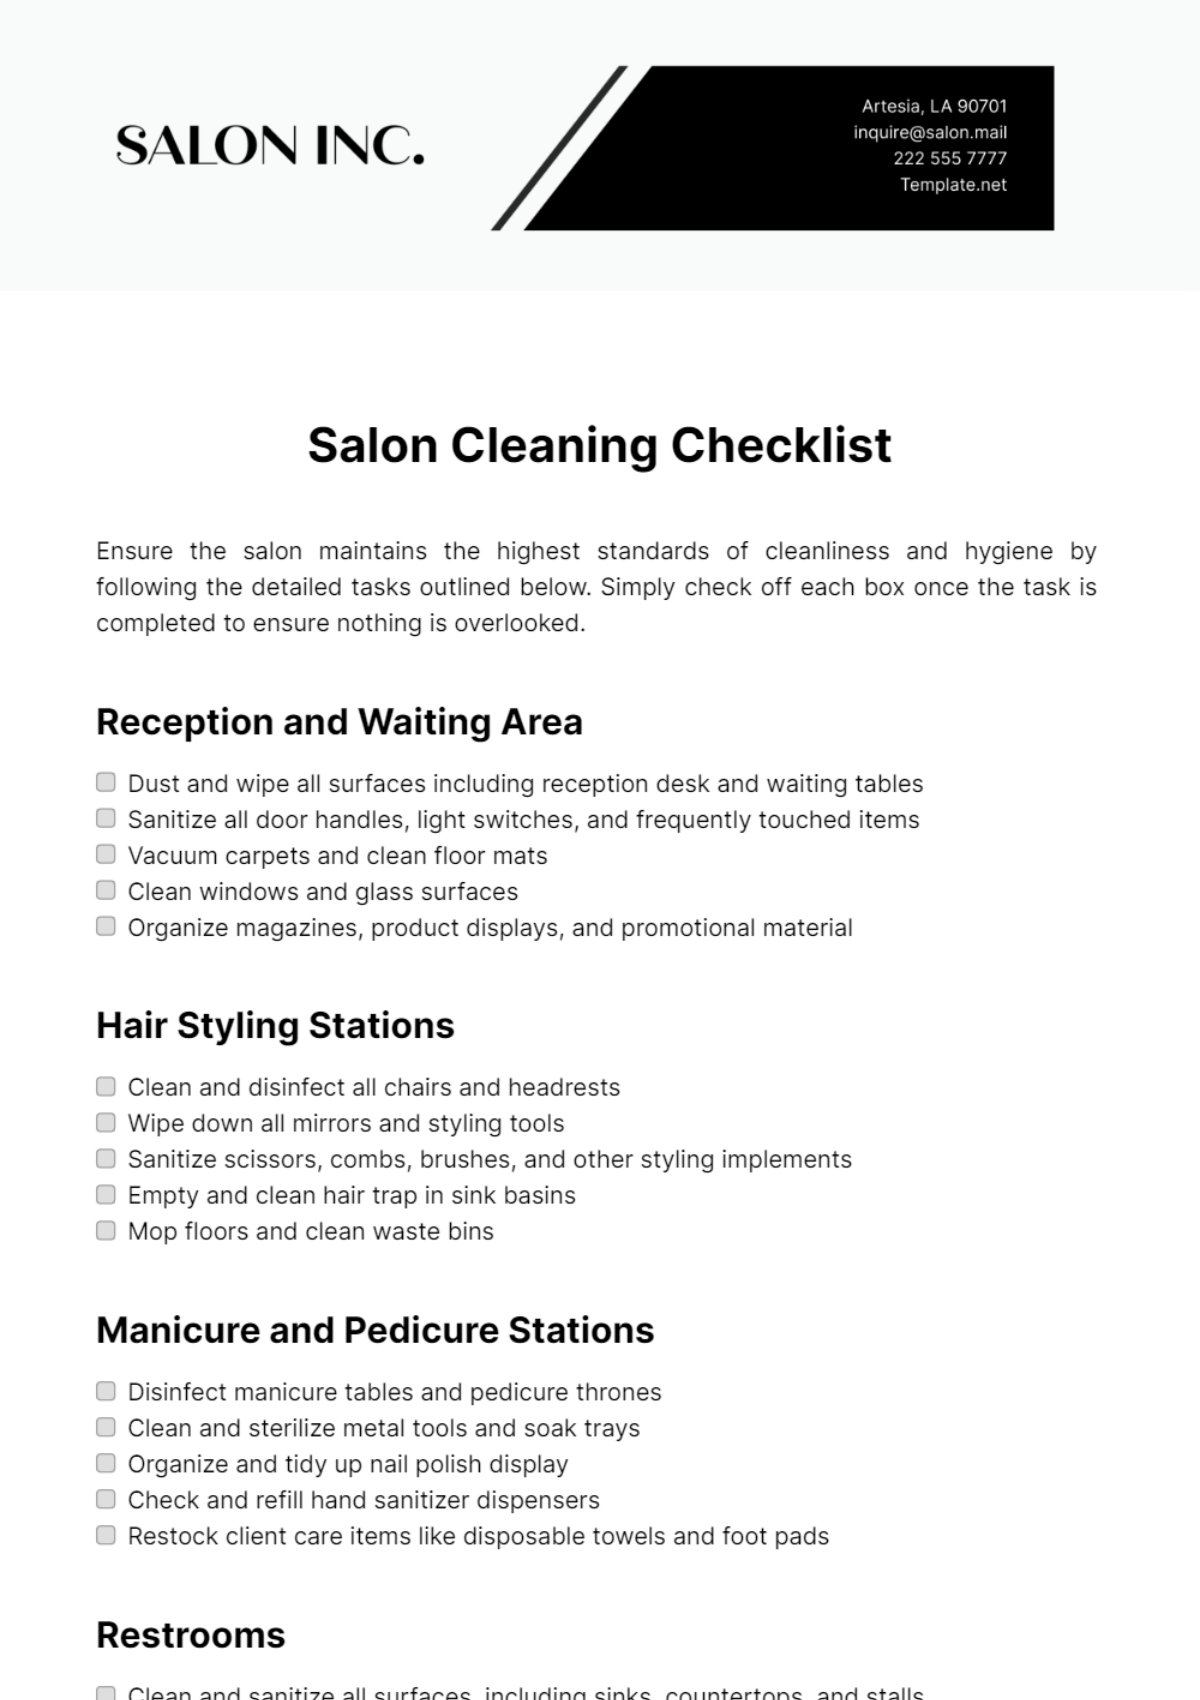 Salon Cleaning Checklist Template